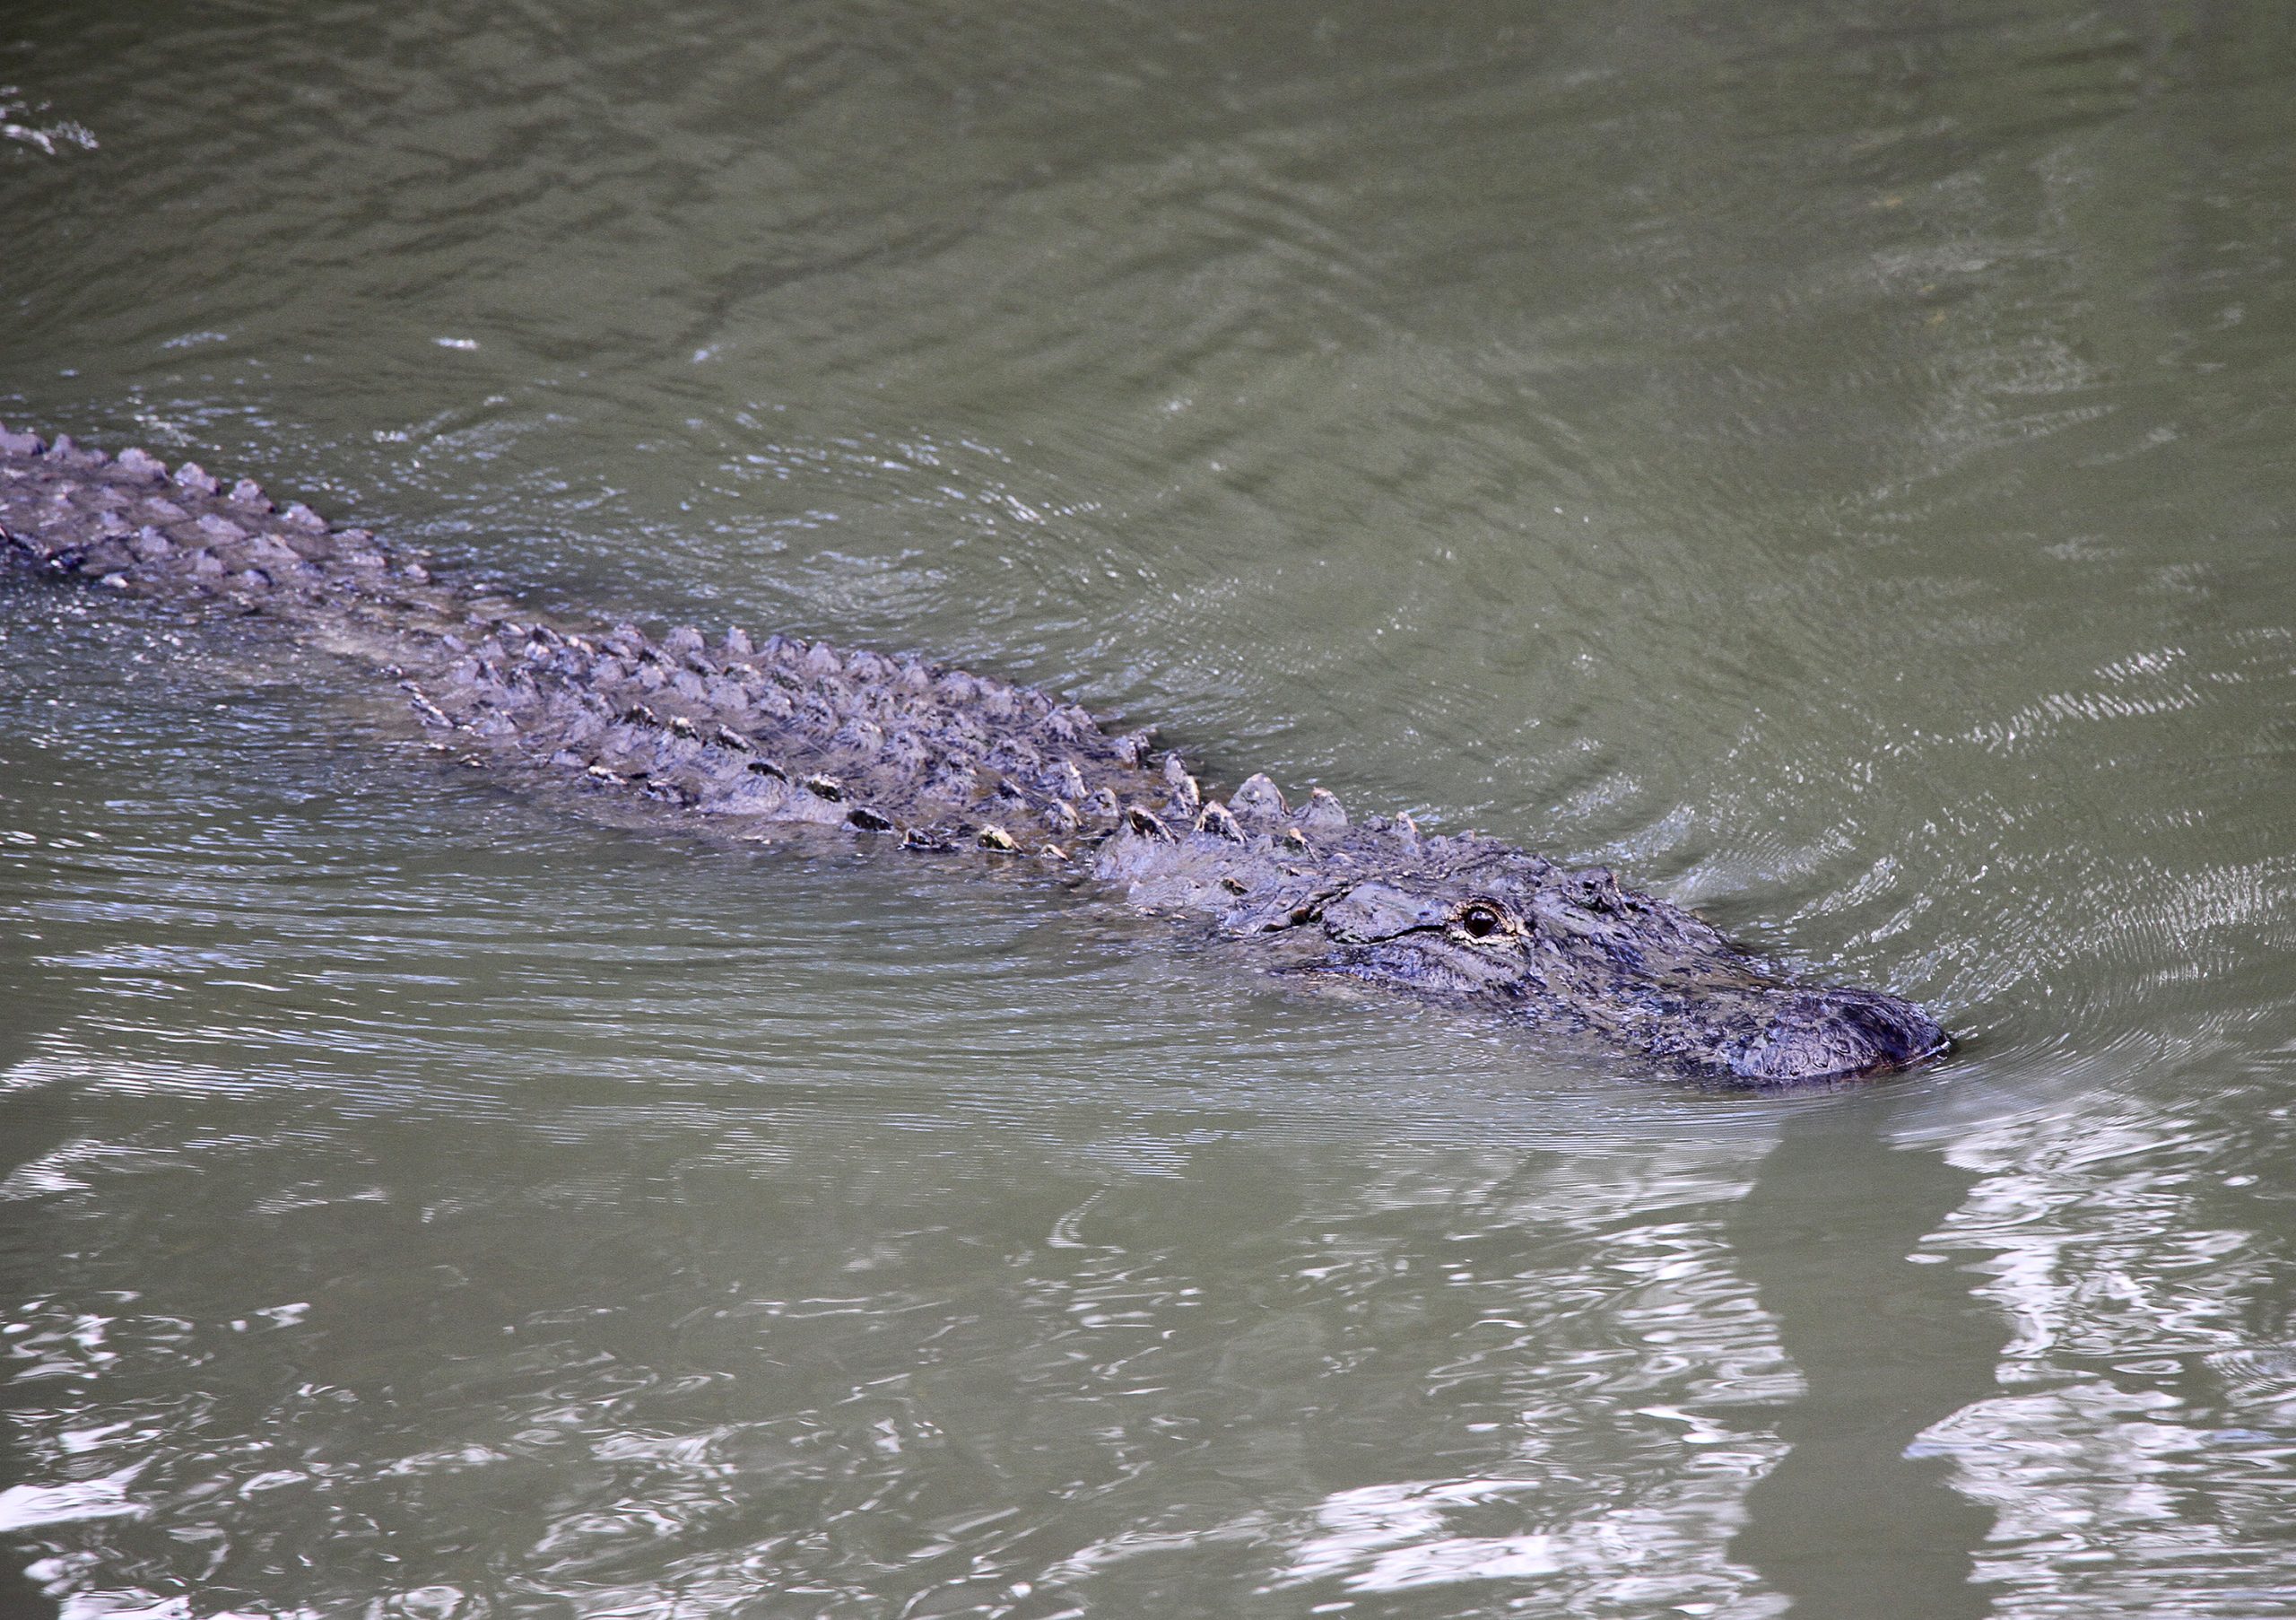 Expect to see alligators throughout Alabama